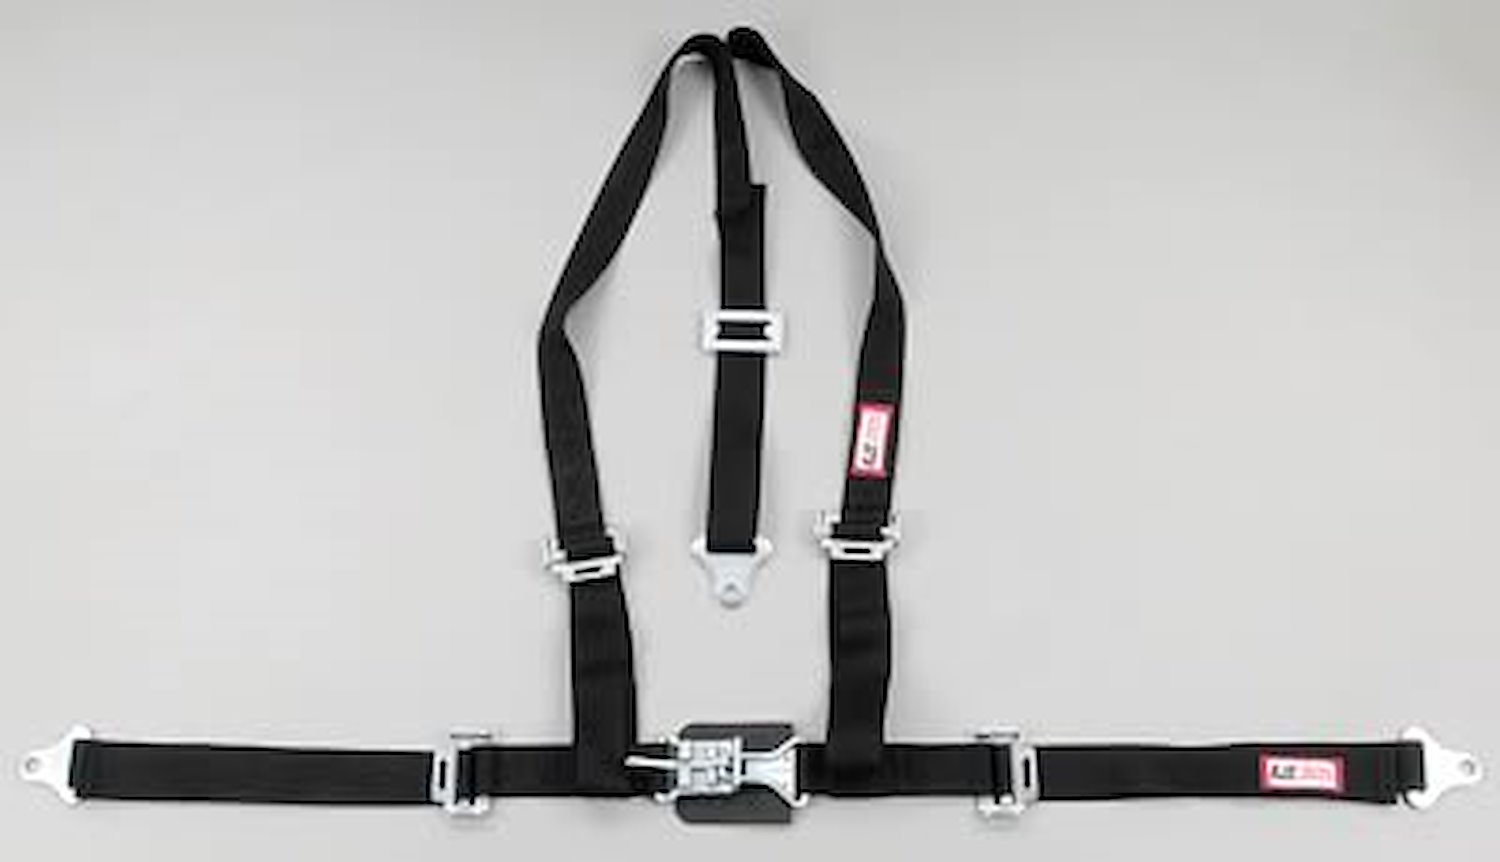 NON-SFI L&L HARNESS 2 PULL UP Lap Belt w/adjuster 2 S.H. V ROLL BAR Mount ALL SNAP ENDS PURPLE